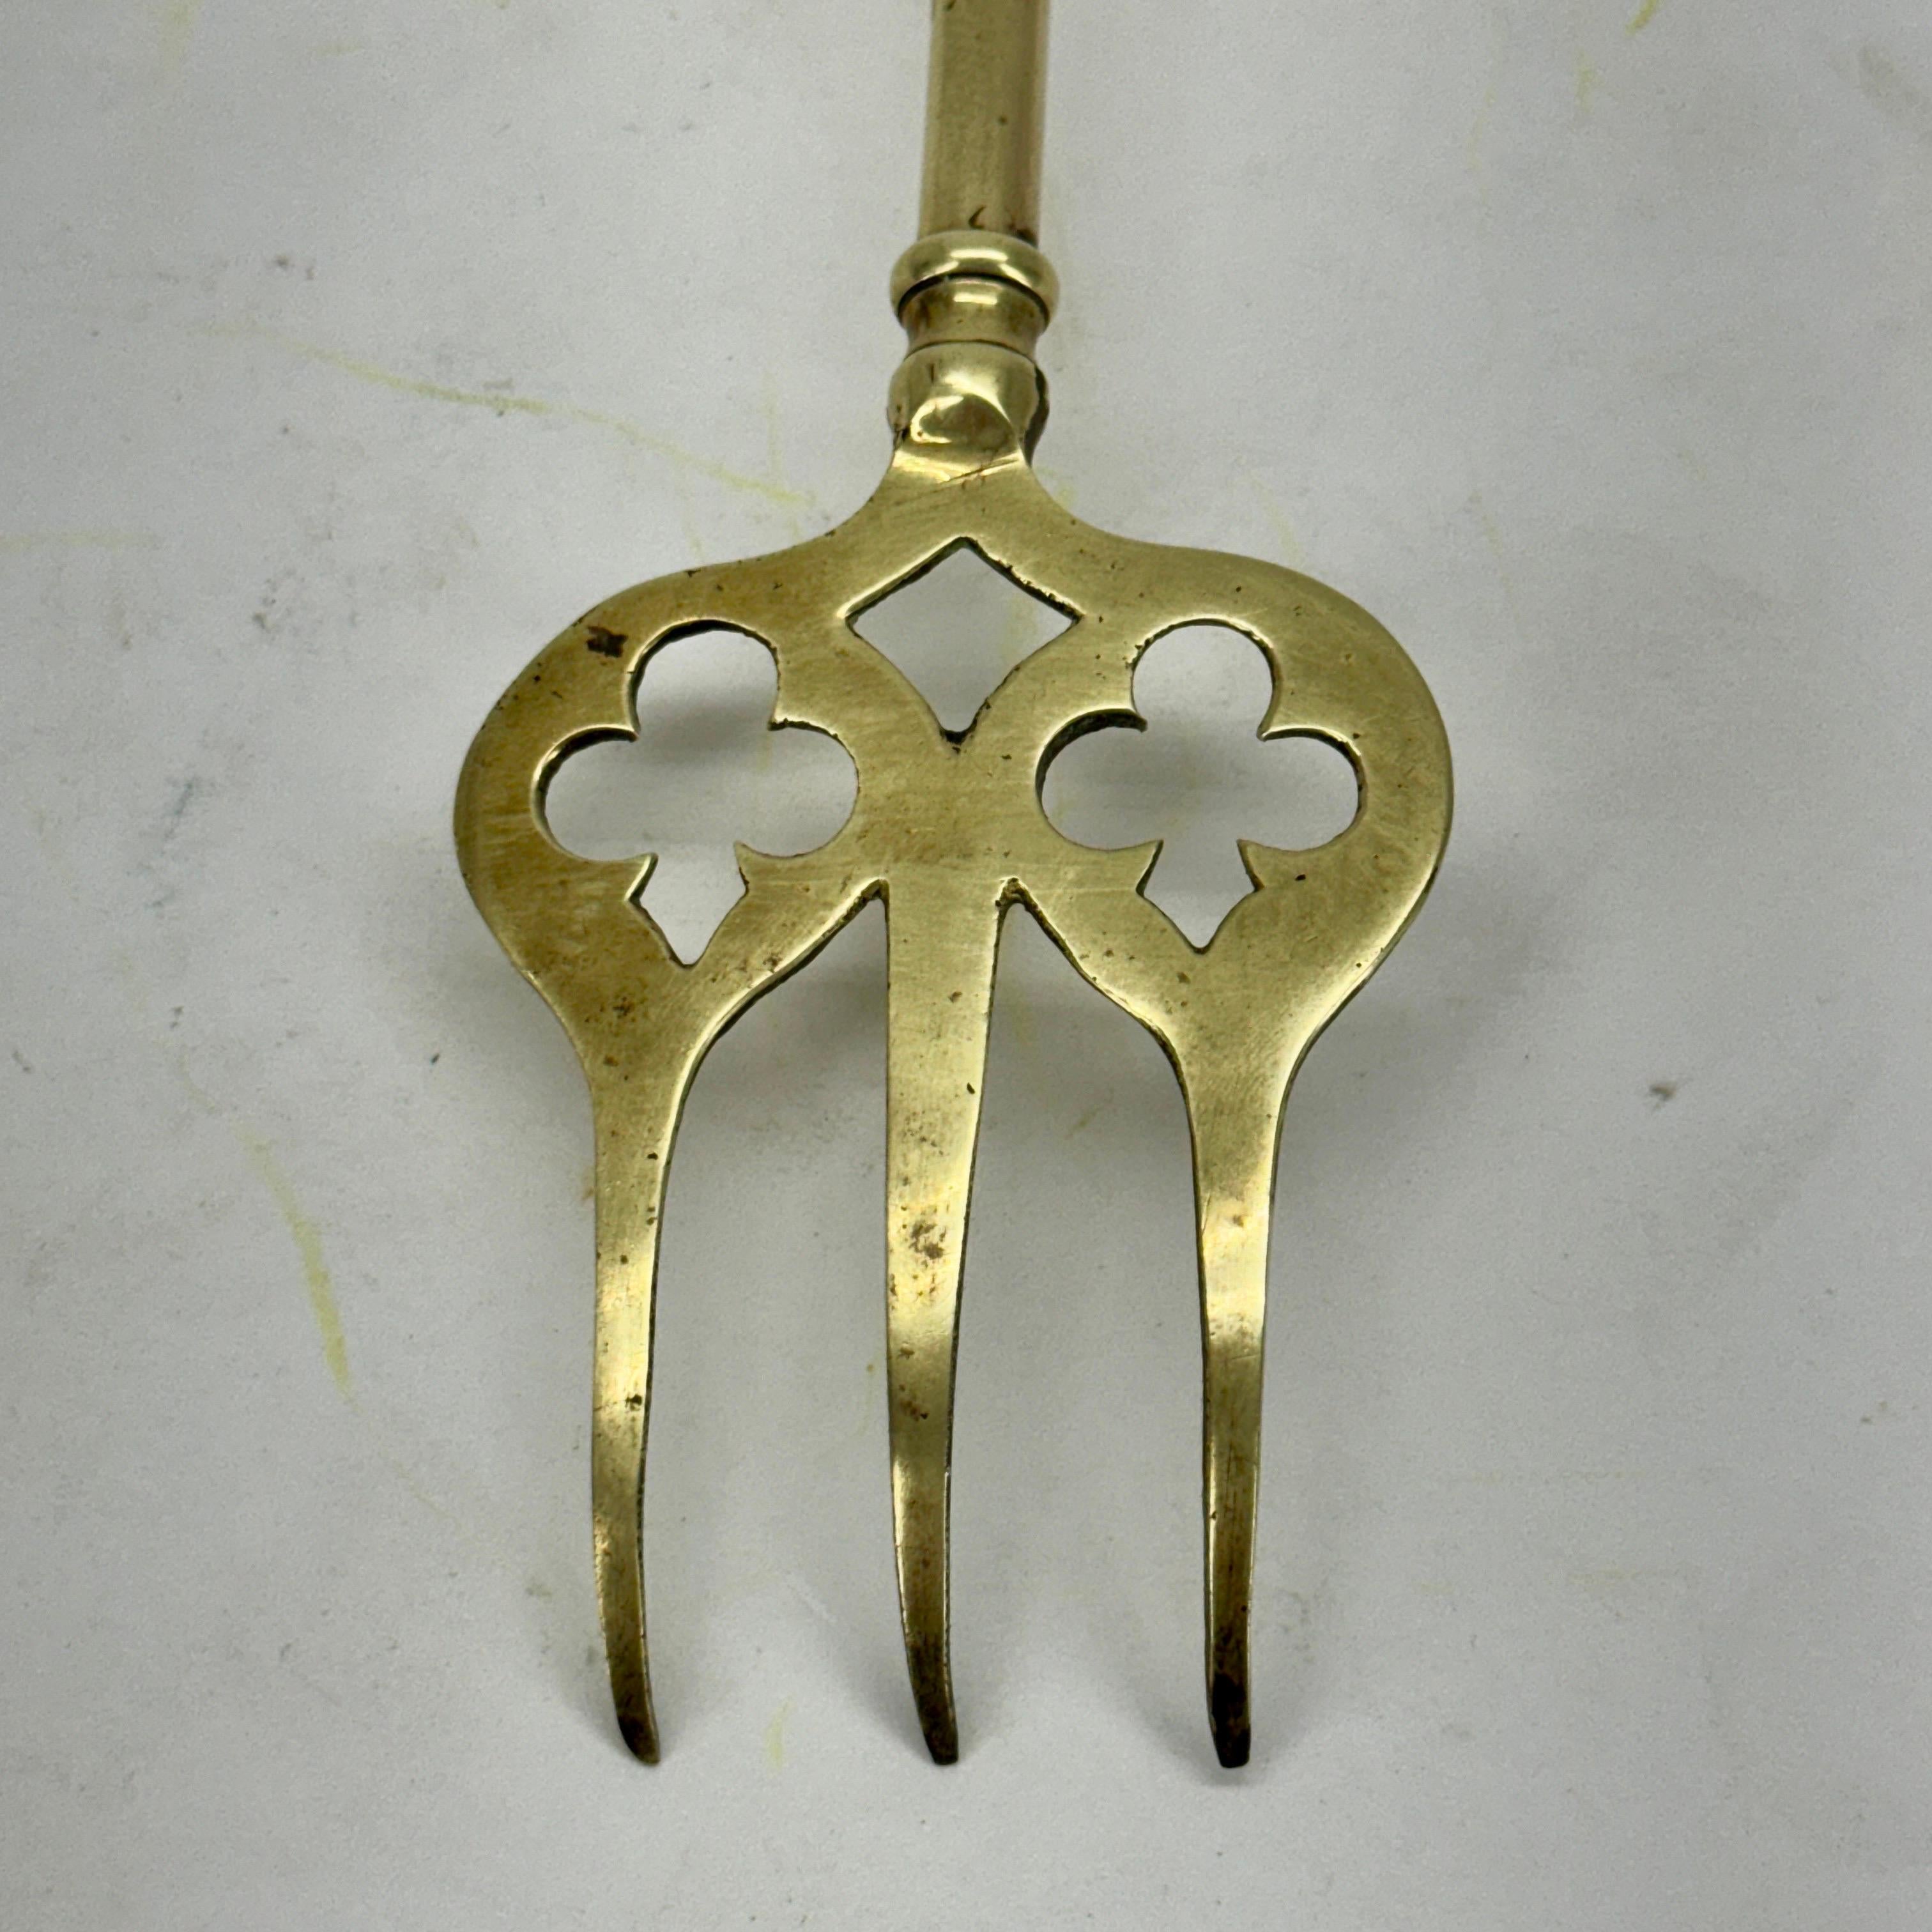 Hand-Crafted Danish Antique Brass Fireplace Neptune Toasting-fork For Sale